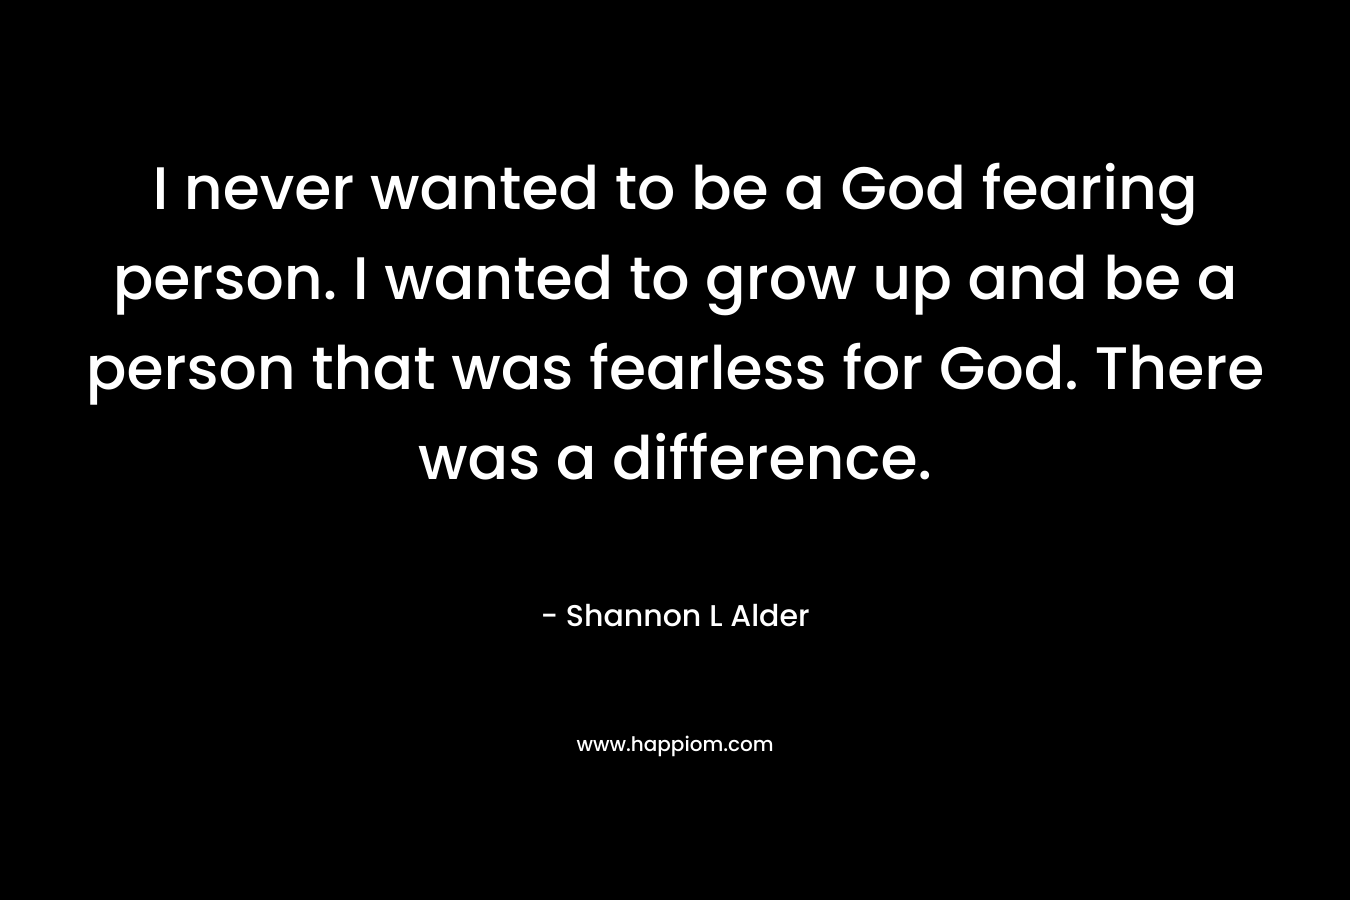 I never wanted to be a God fearing person. I wanted to grow up and be a person that was fearless for God. There was a difference.